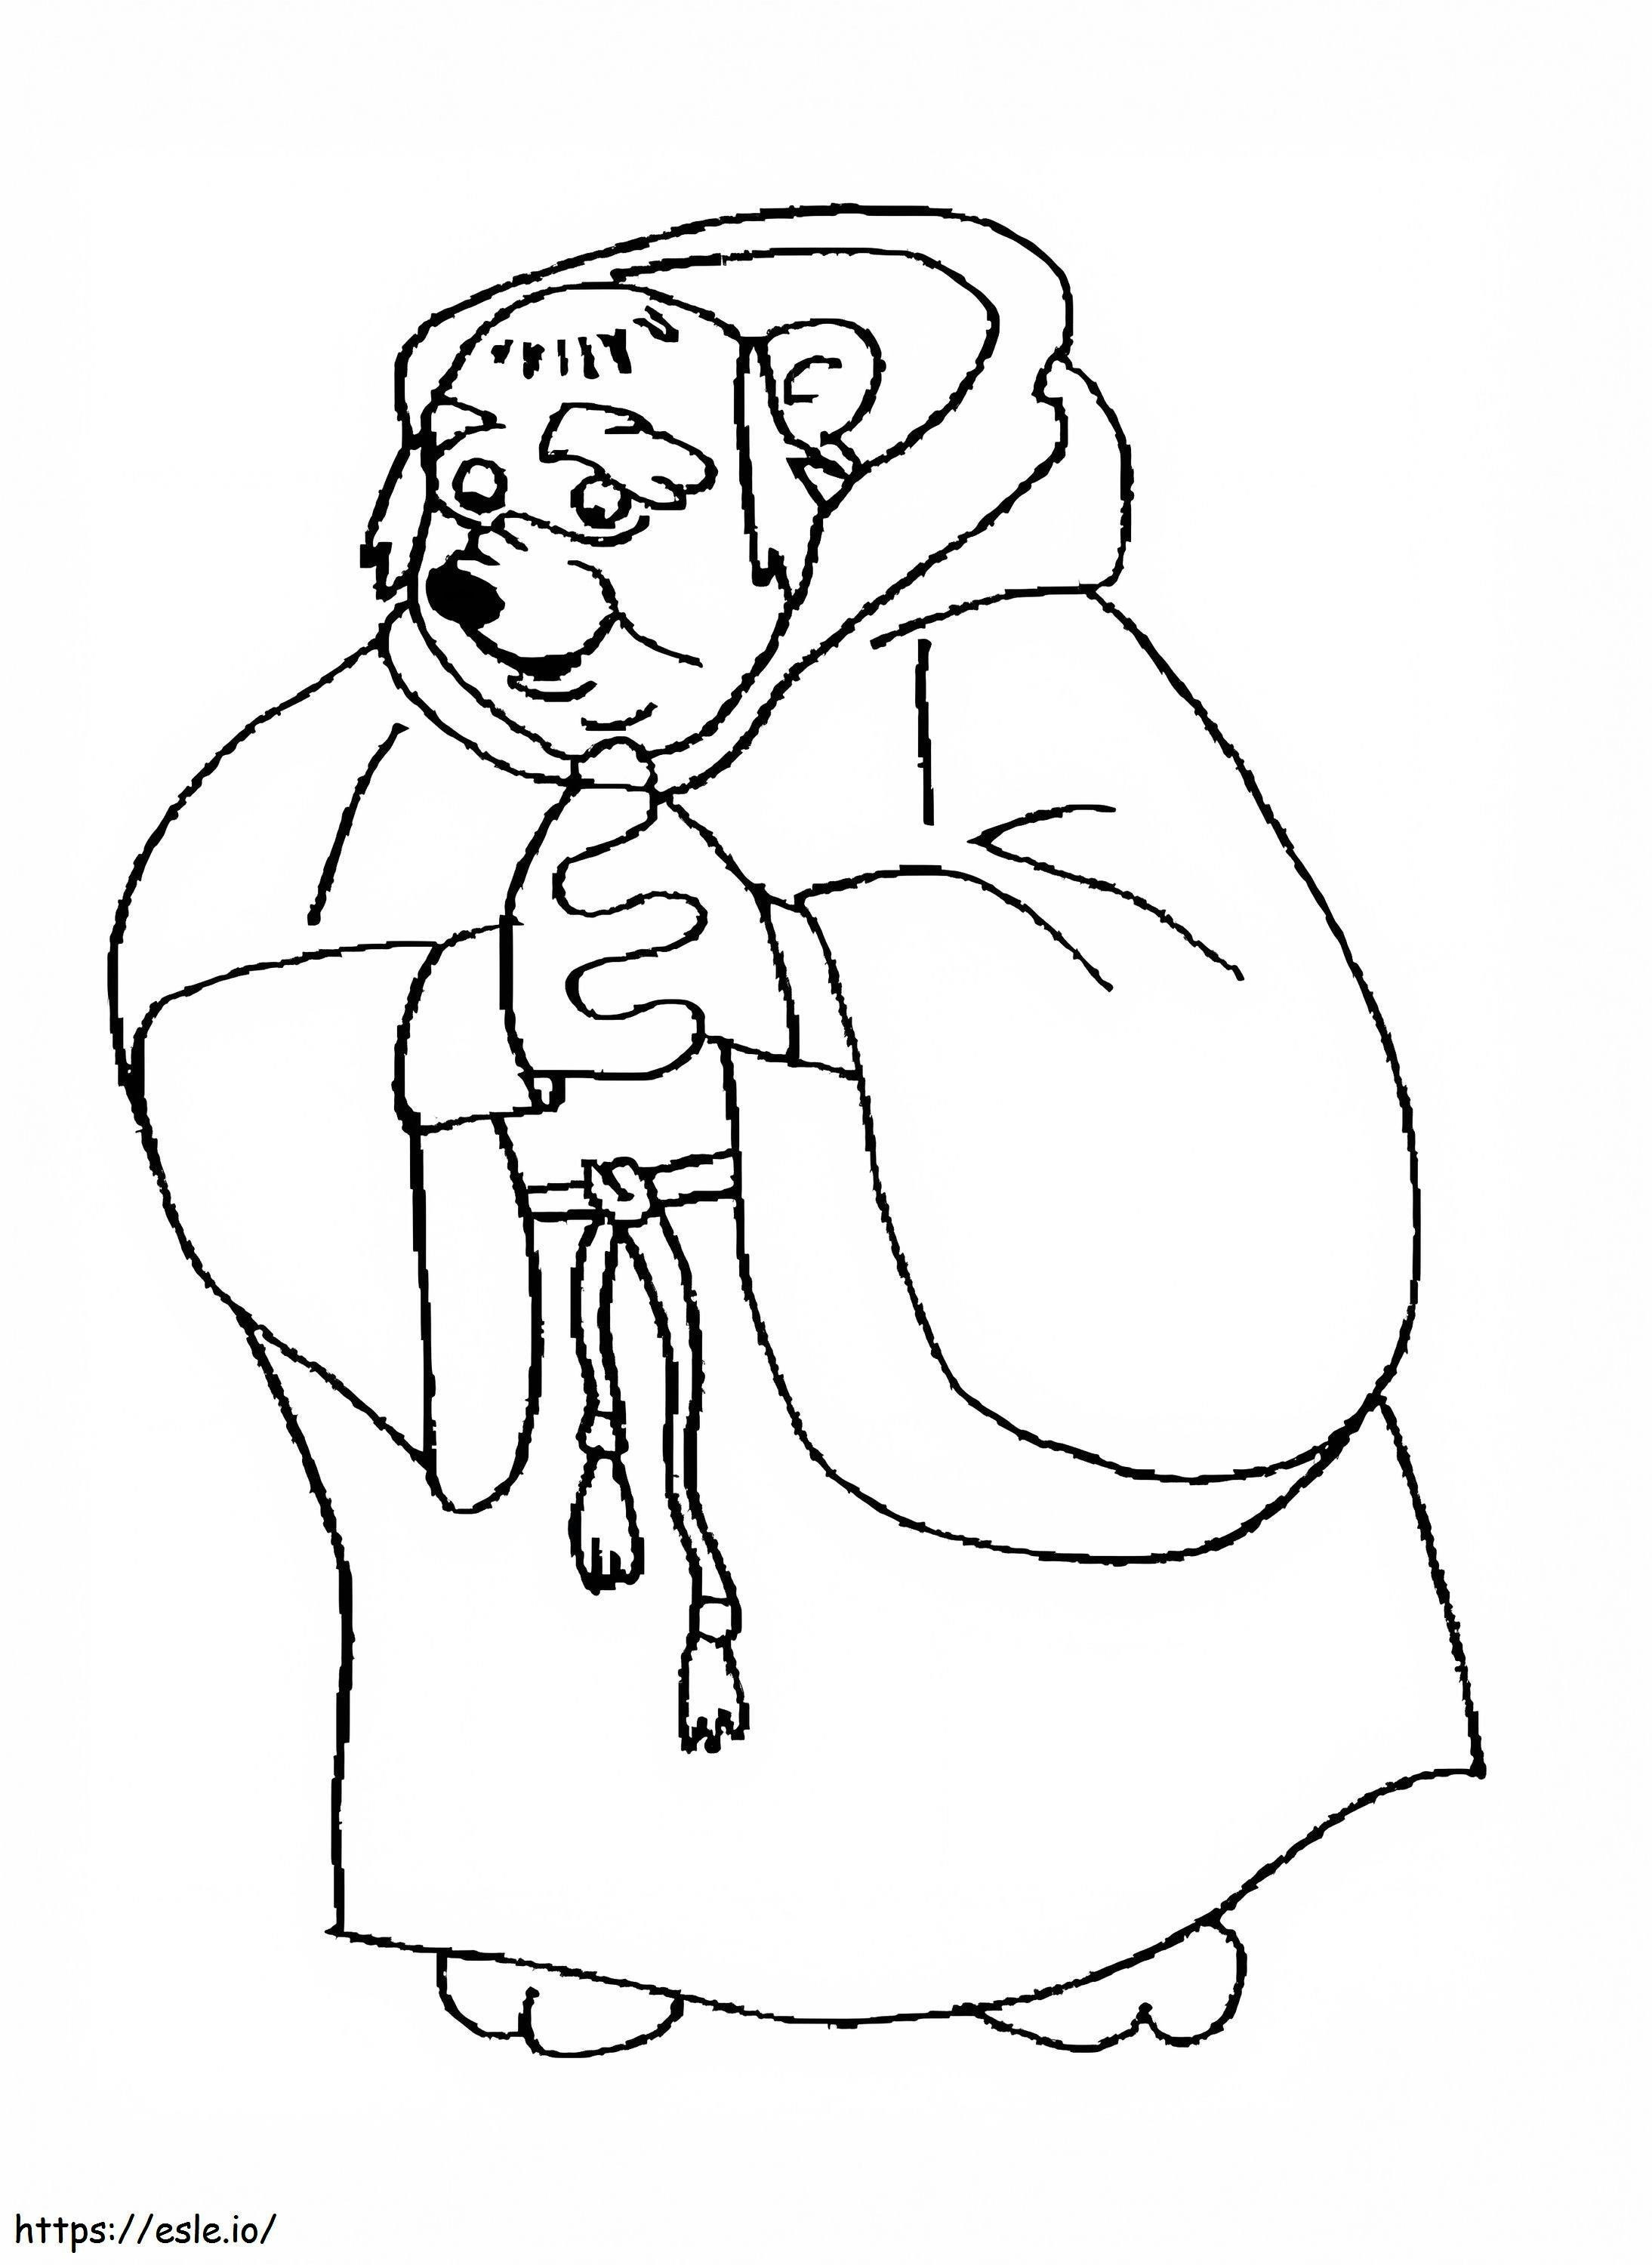 Brother Tuck Of Robin Hood coloring page